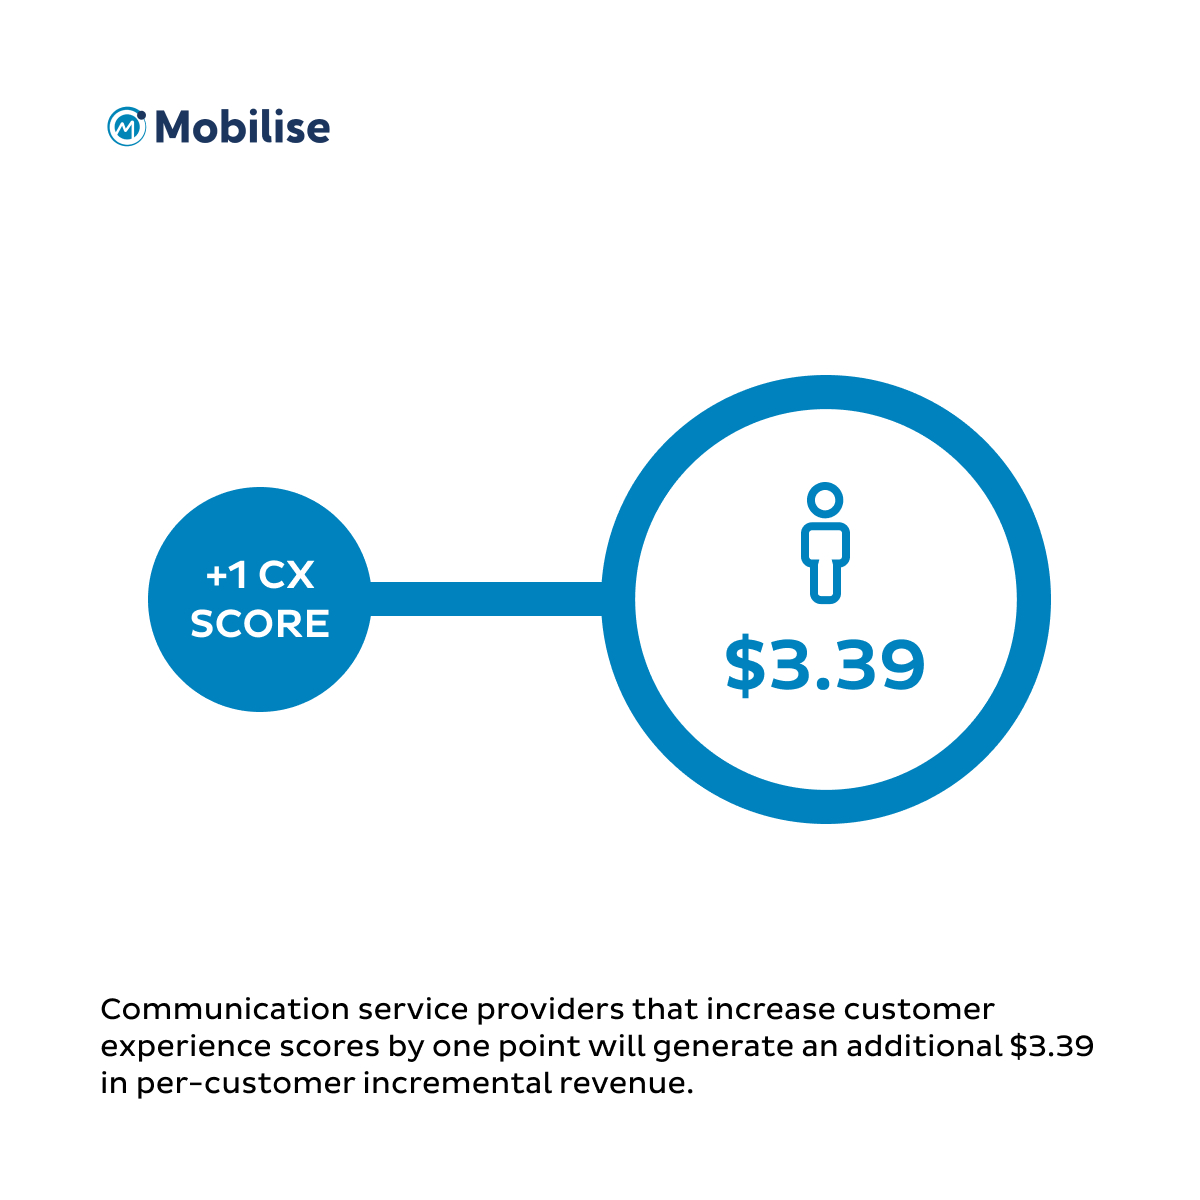 Infographic showing that SPs will generate $3.39 for increasing CX scores by one point